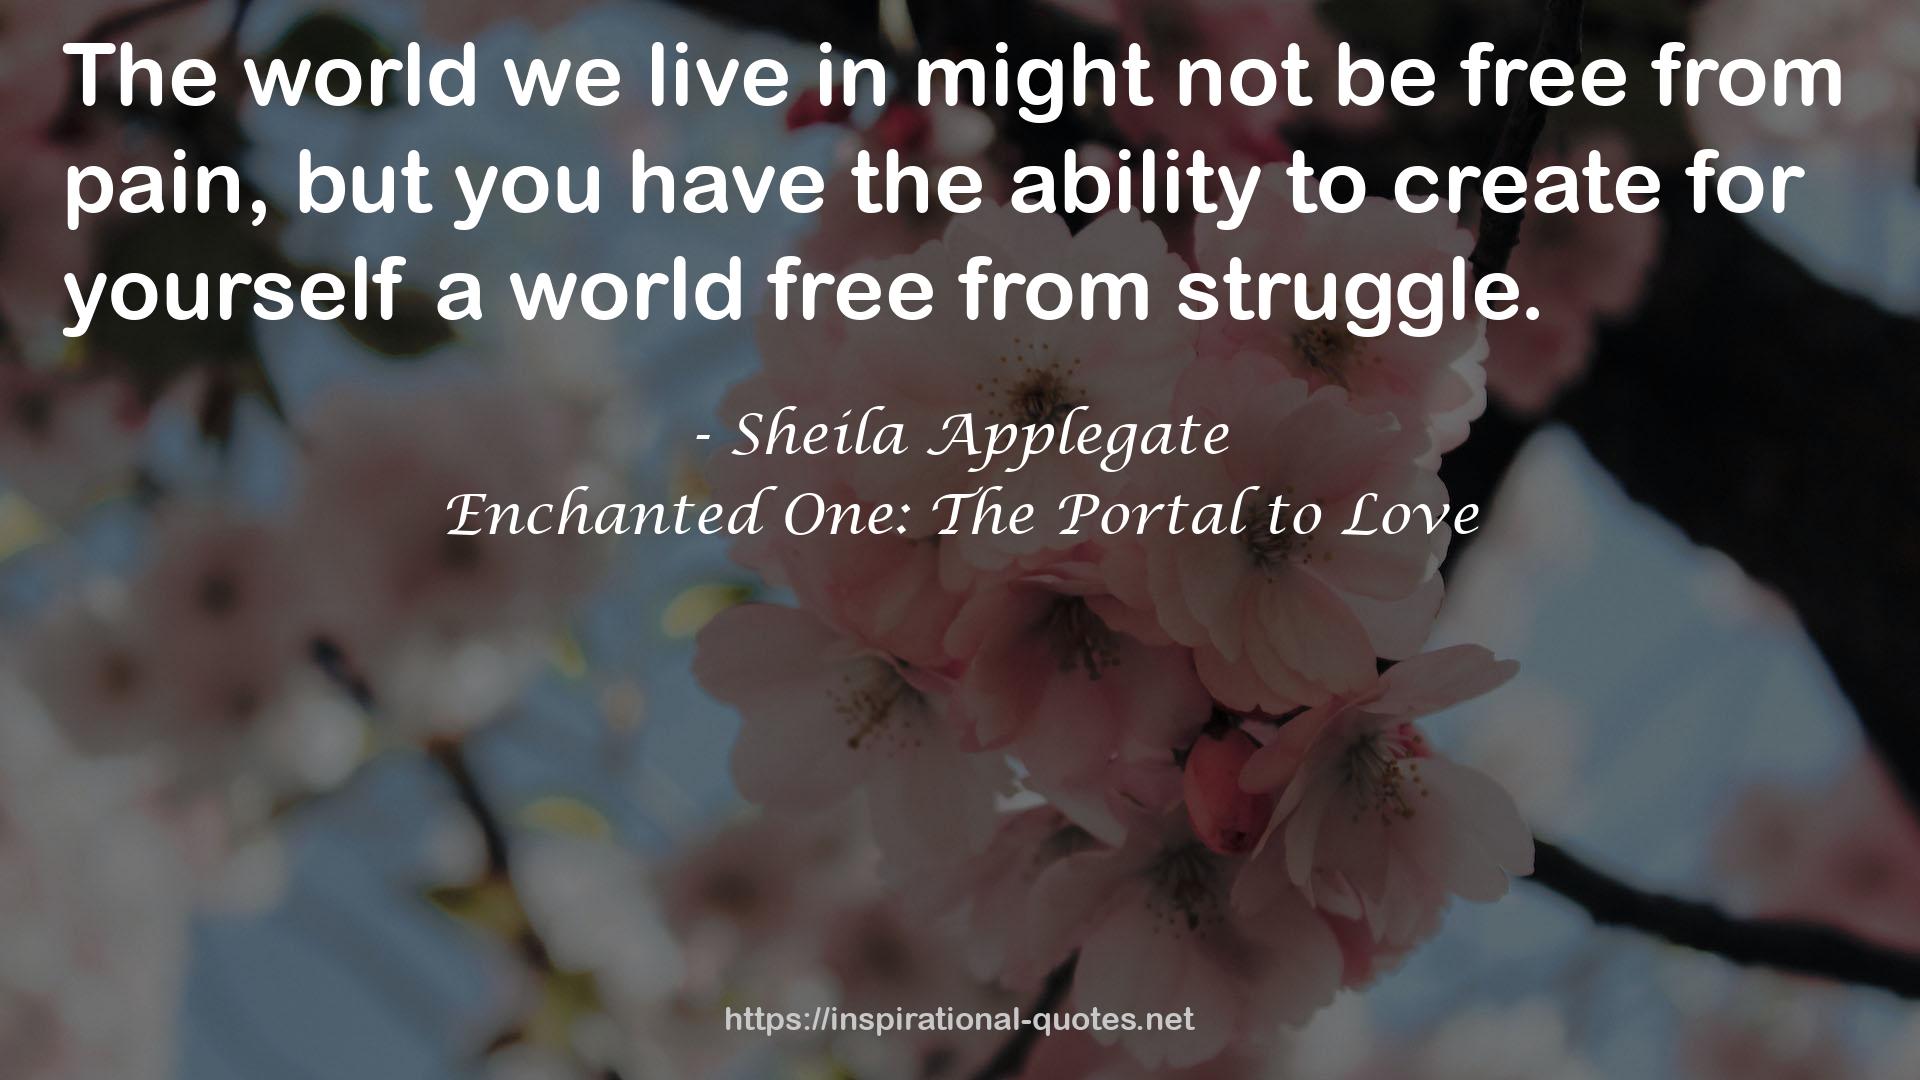 Sheila Applegate QUOTES